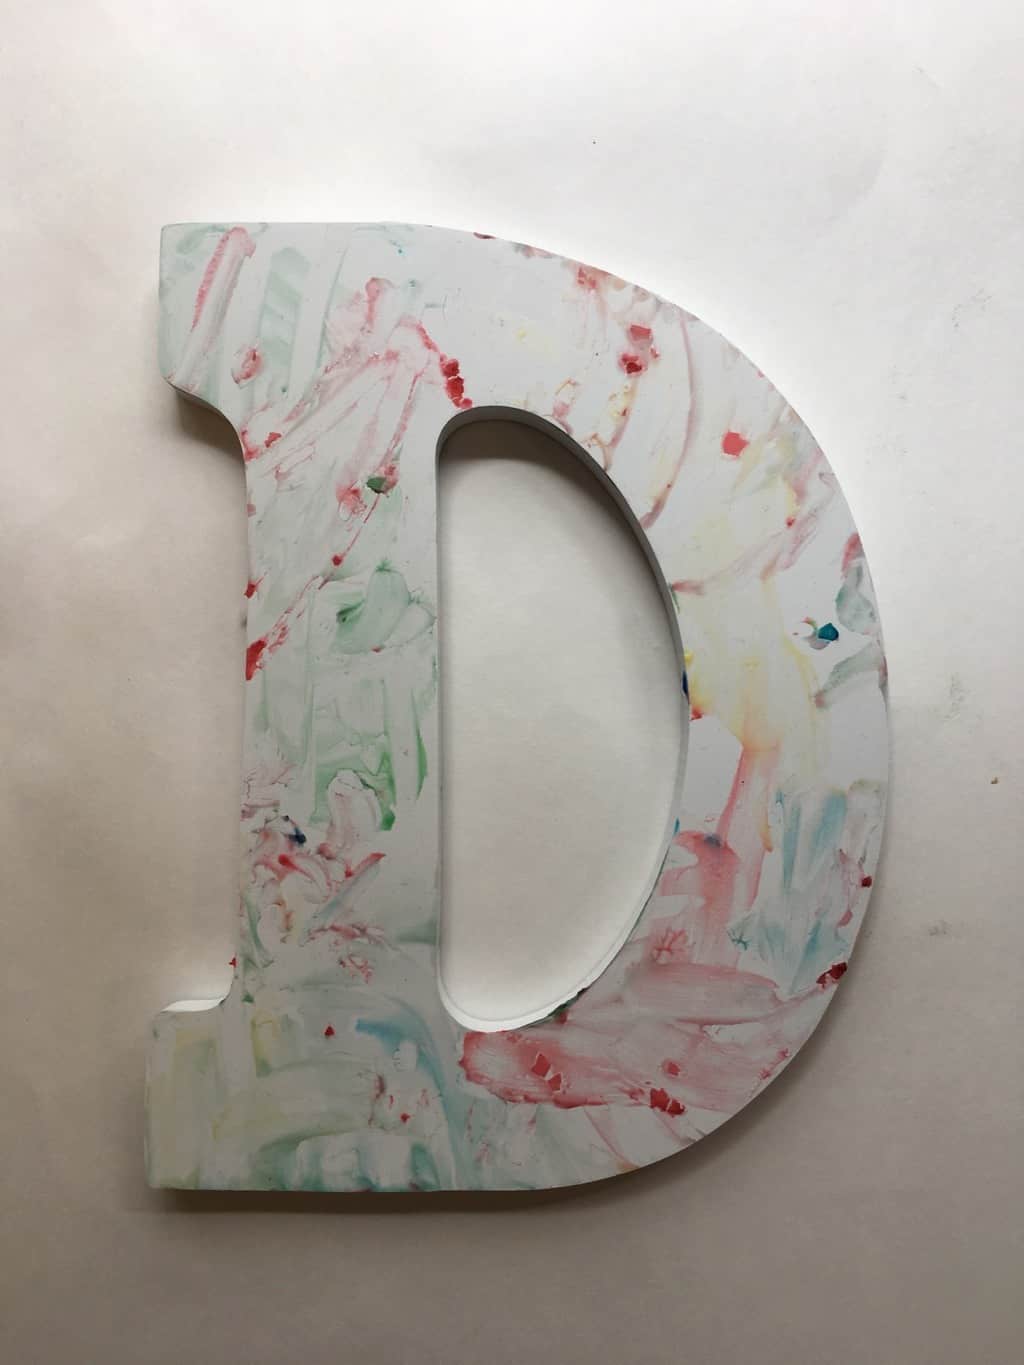 Letter D done with fingerpaint for Father's Day